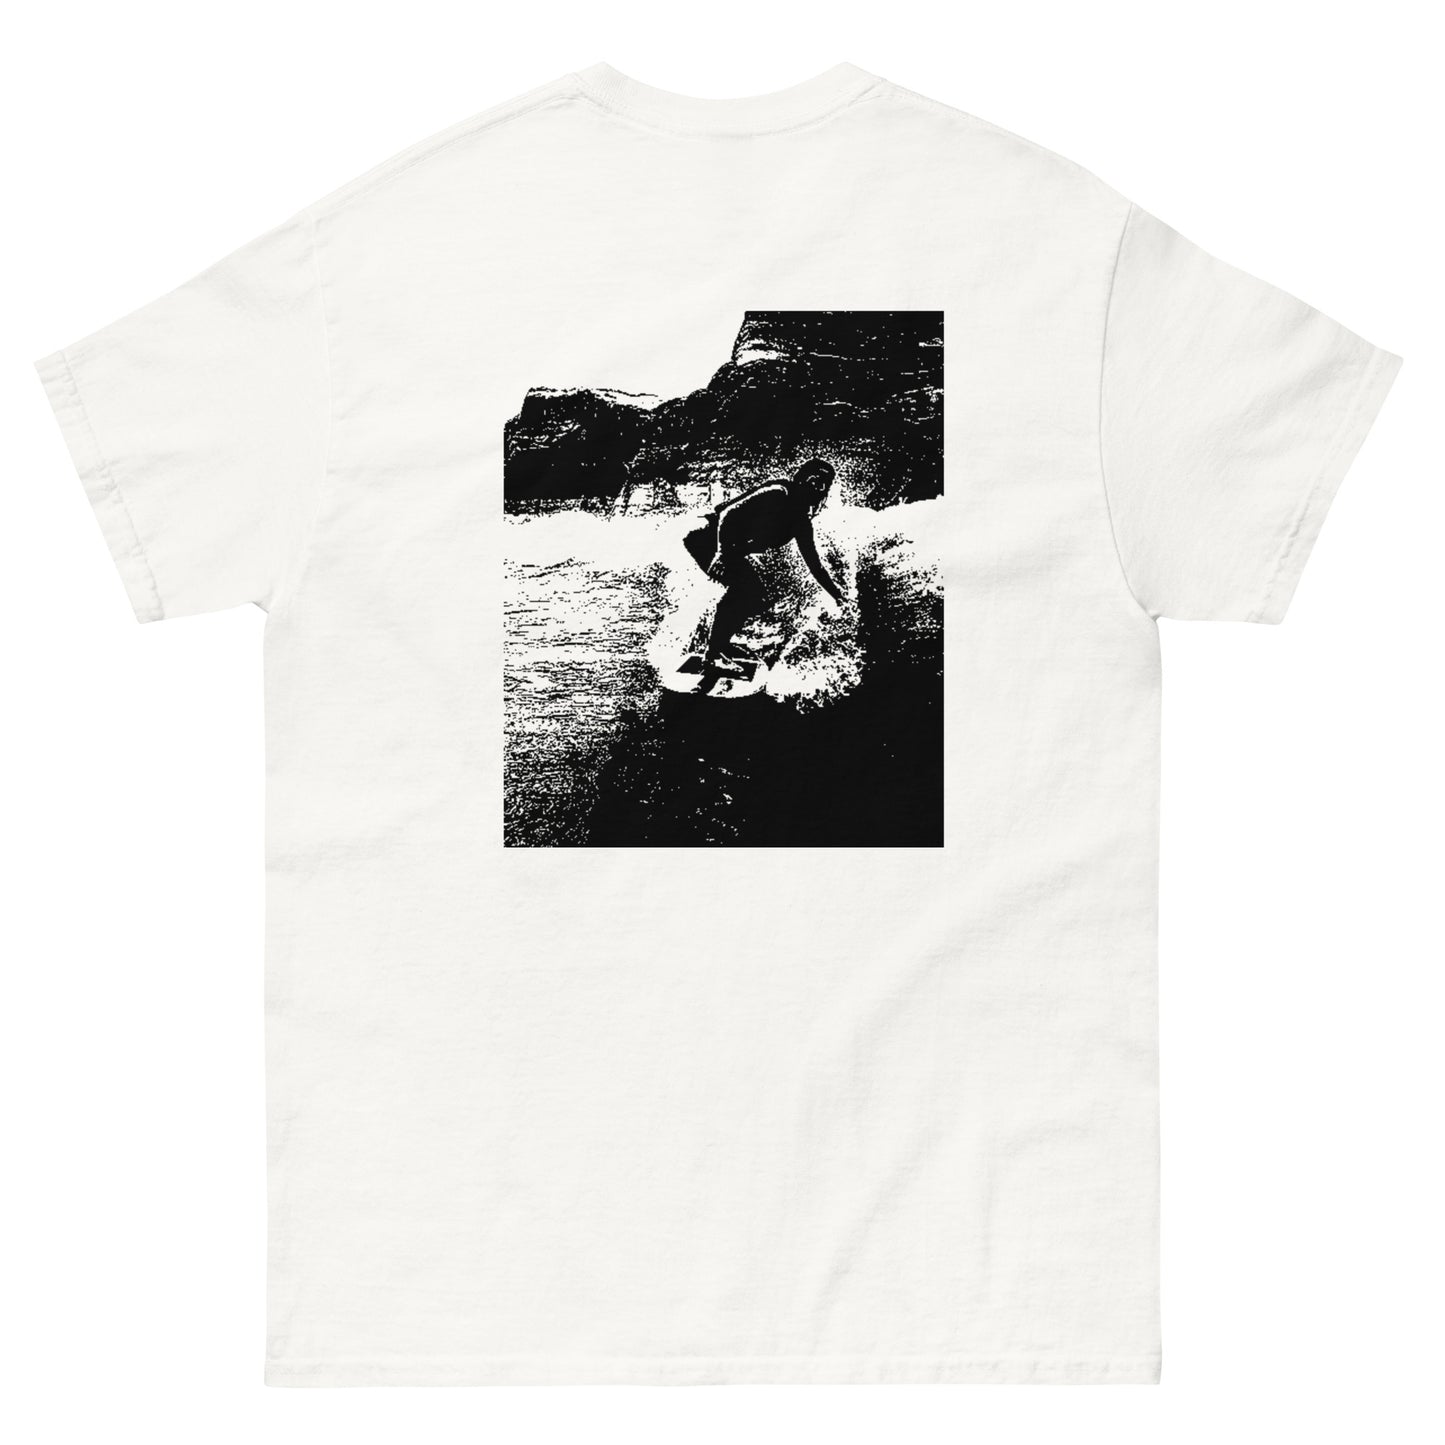 Silhouette Surf's Up Tee